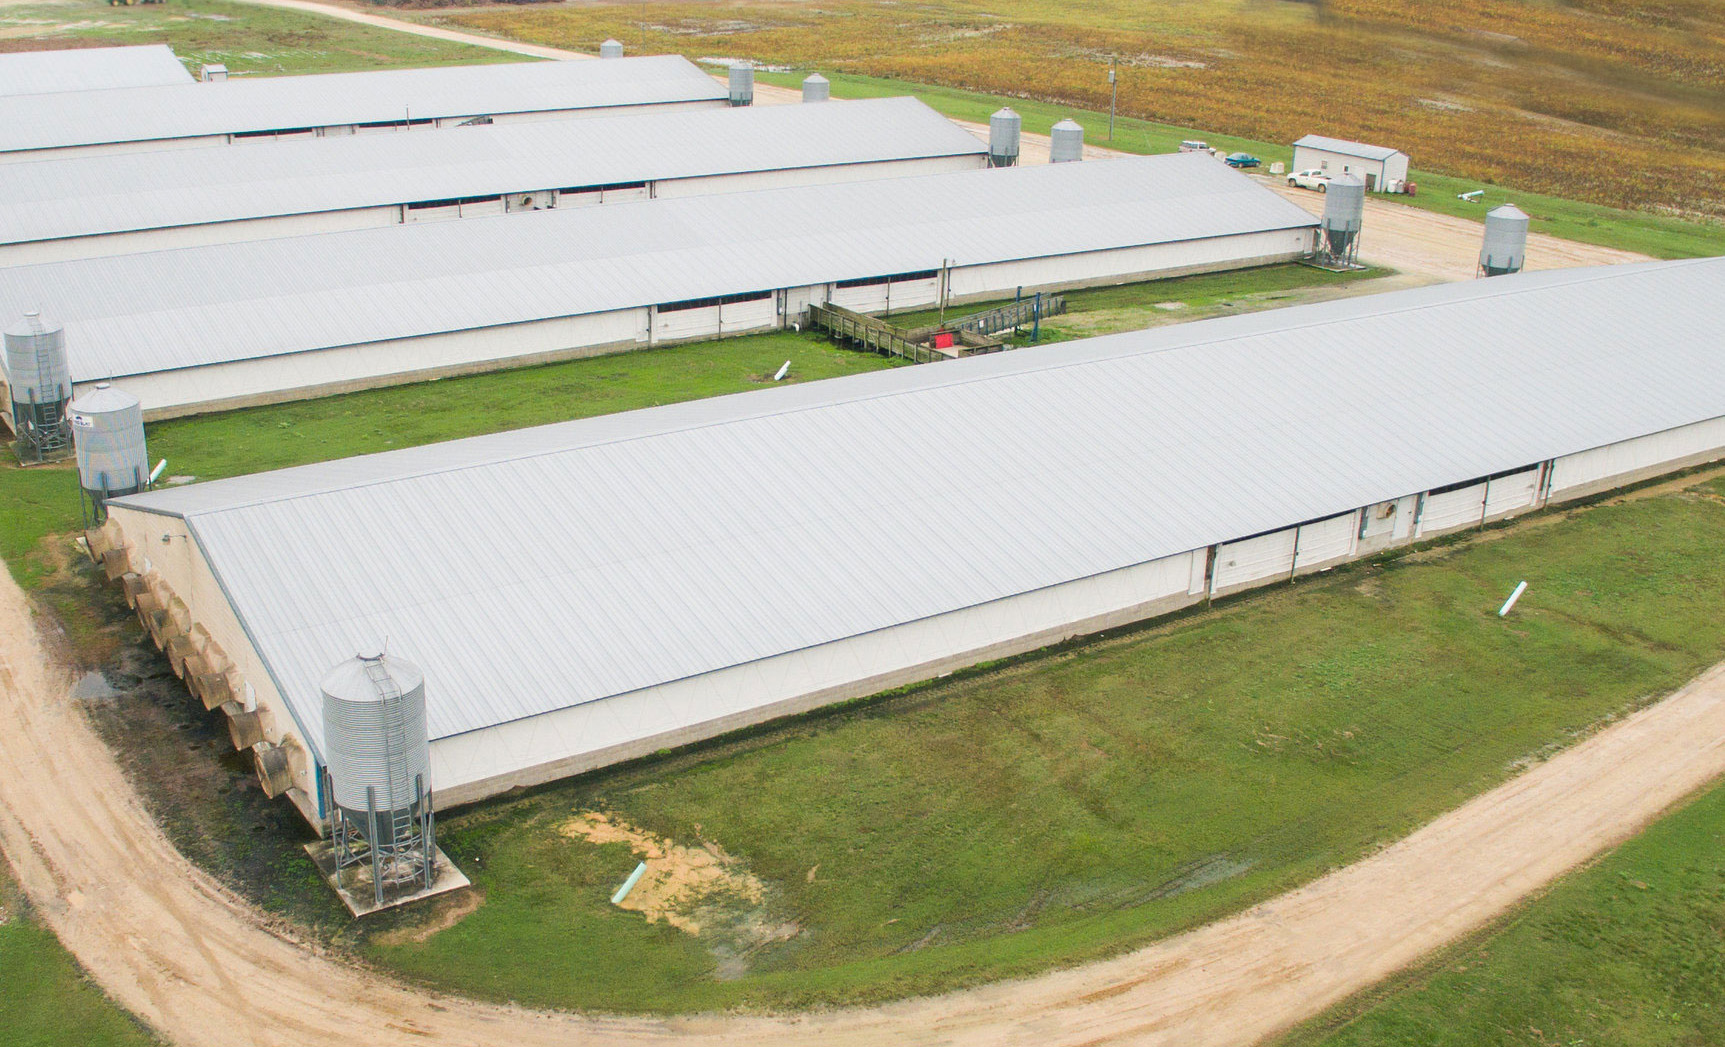 An aerial view of a series of swine finishing facilities.